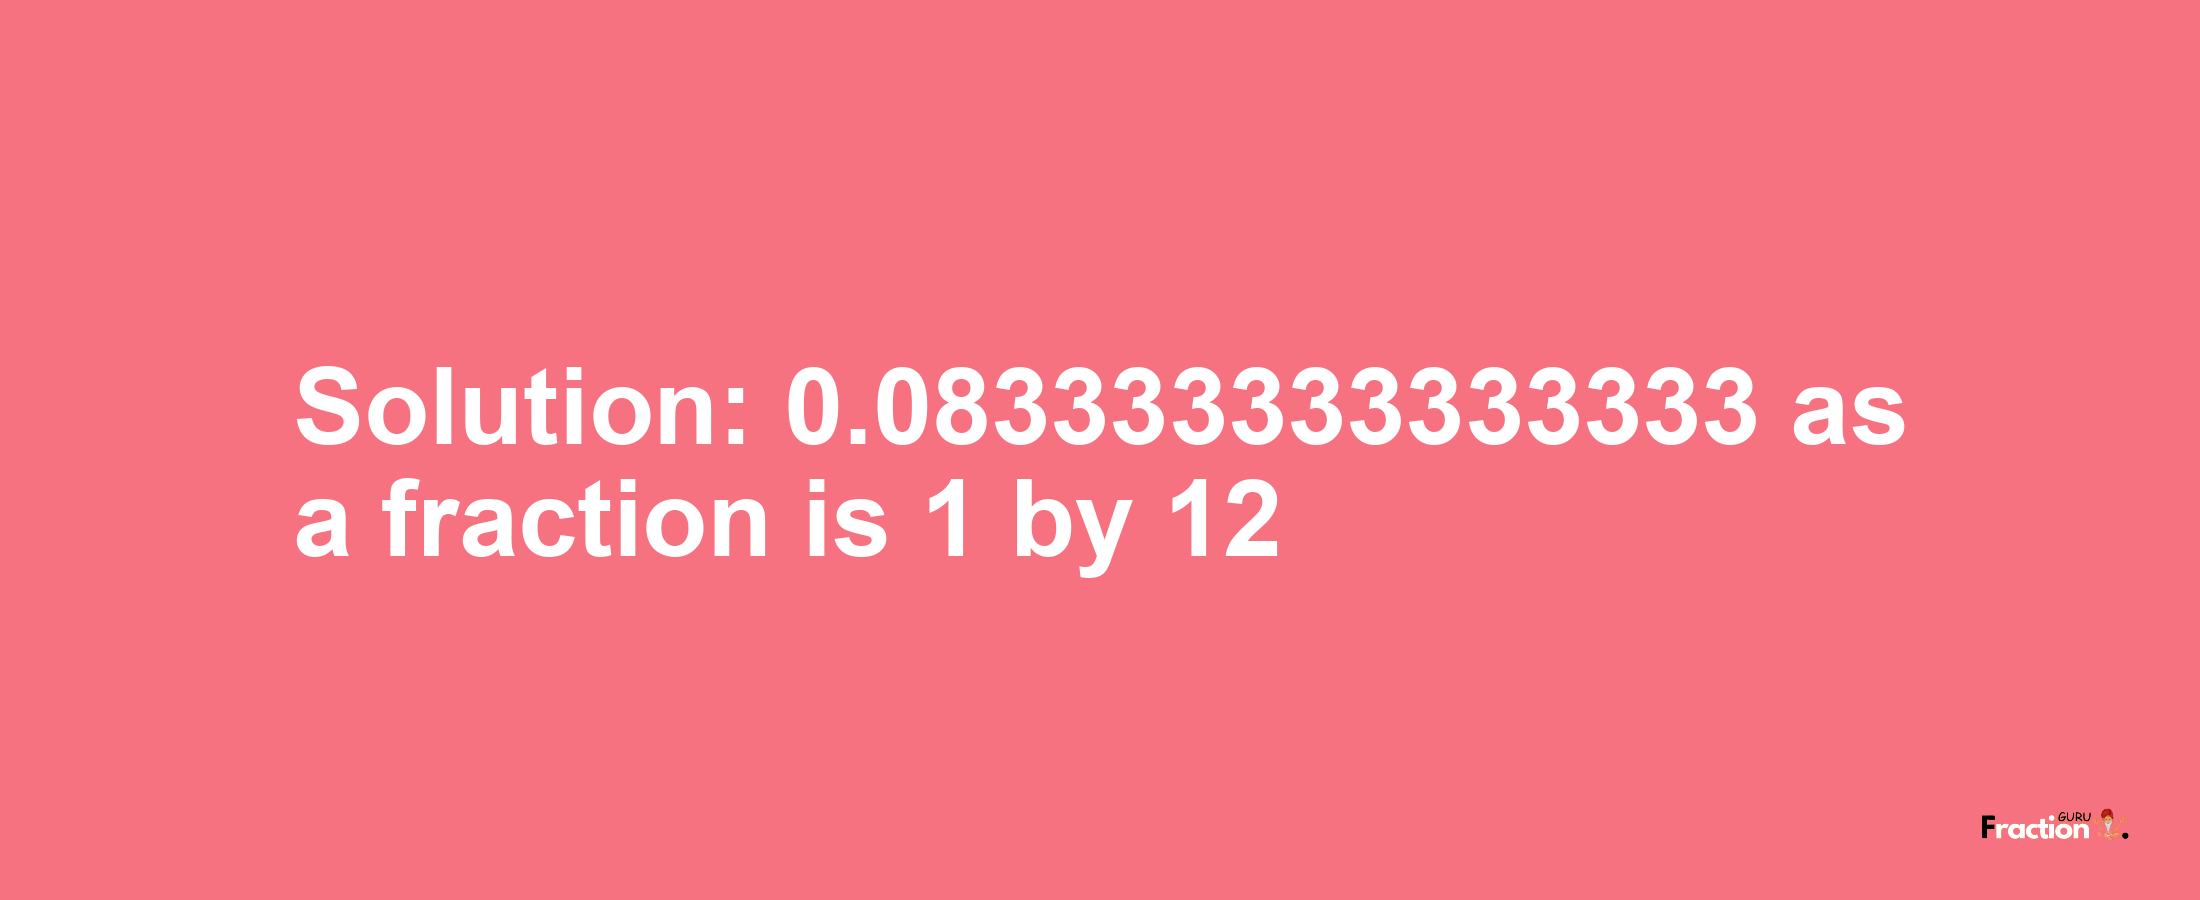 Solution:0.083333333333333 as a fraction is 1/12